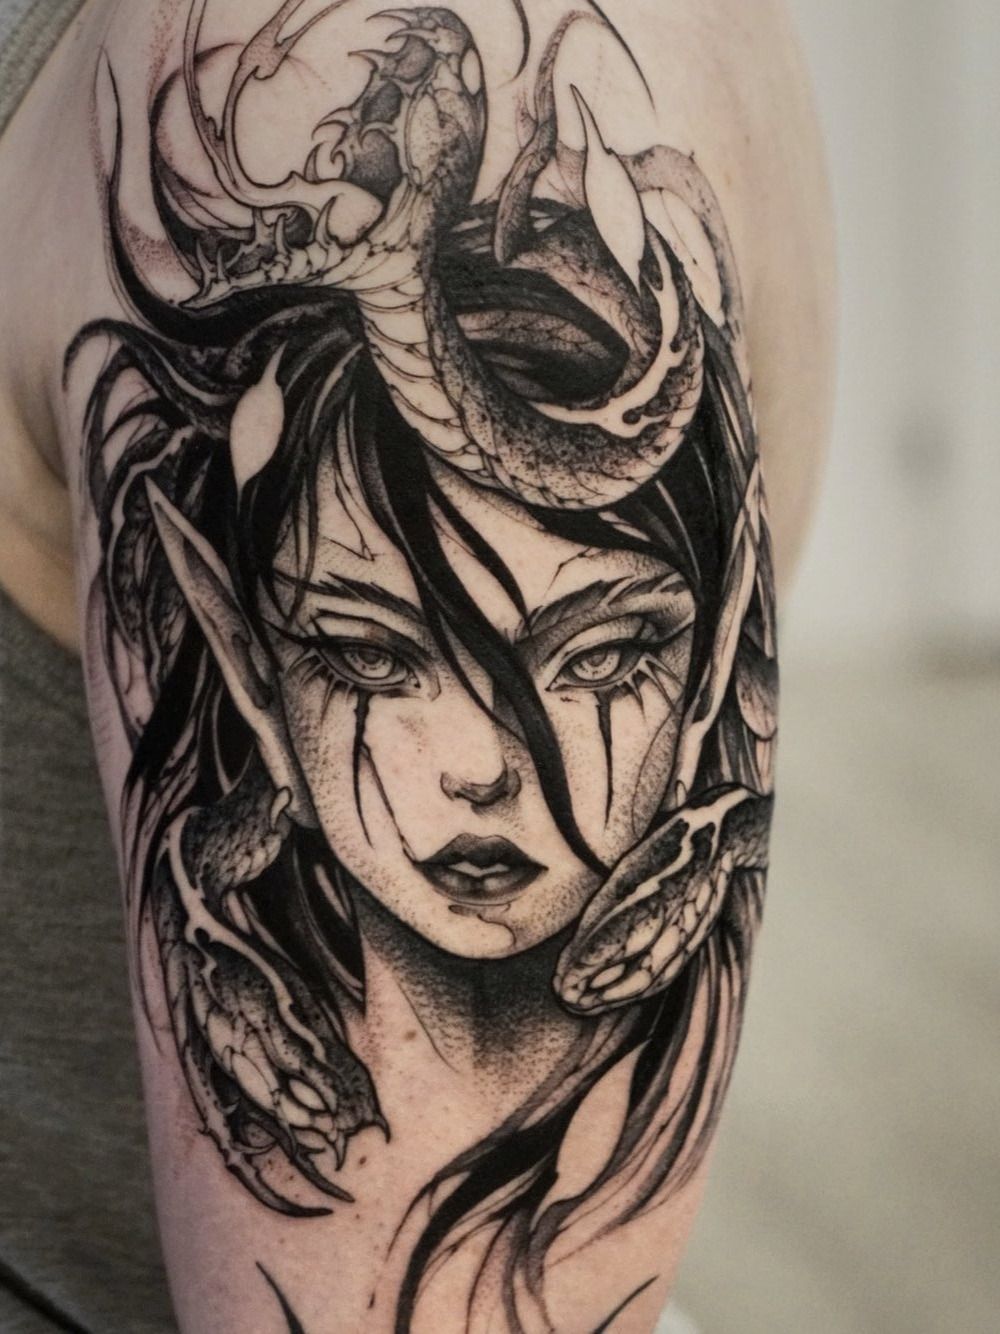 My succubus tattoo by Ty Engler private studio Thornton CO  rtattoos